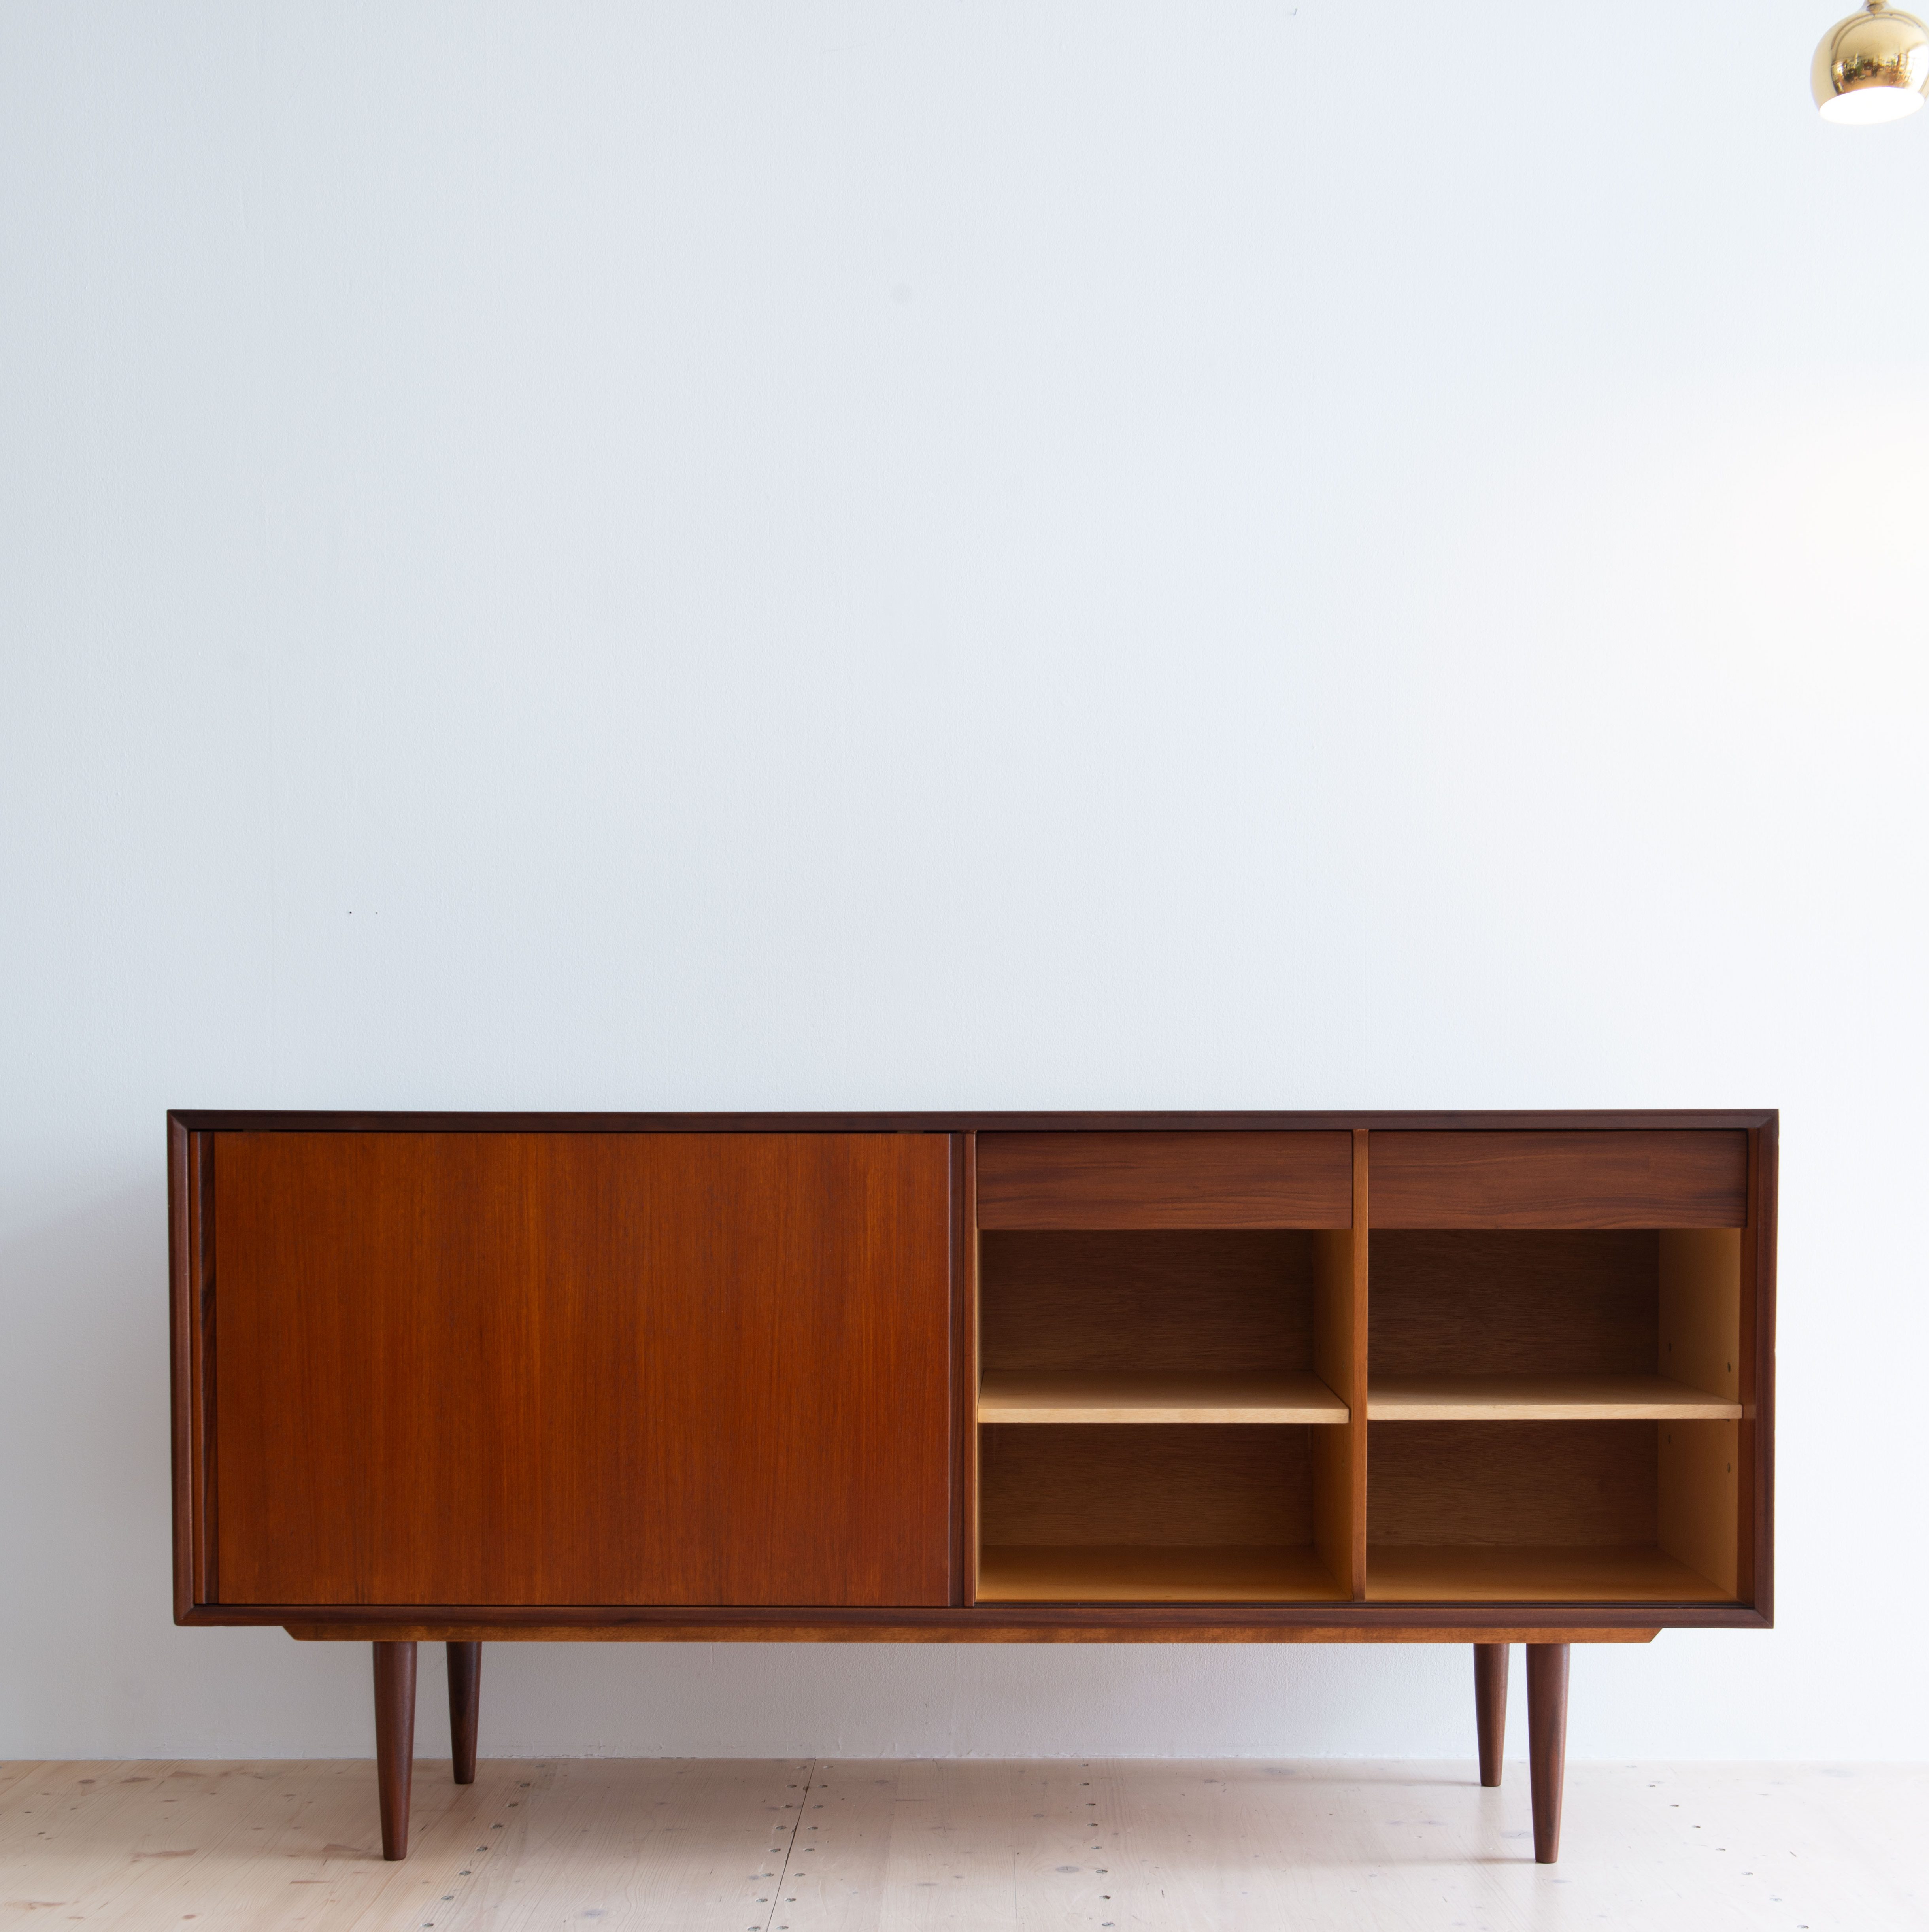 Canadian Made Teak Sideboard. Produced by RS Associates in Canada, 1960s. Available at heyday möbel, Grubenstrasse 19, 8045 Zürich.